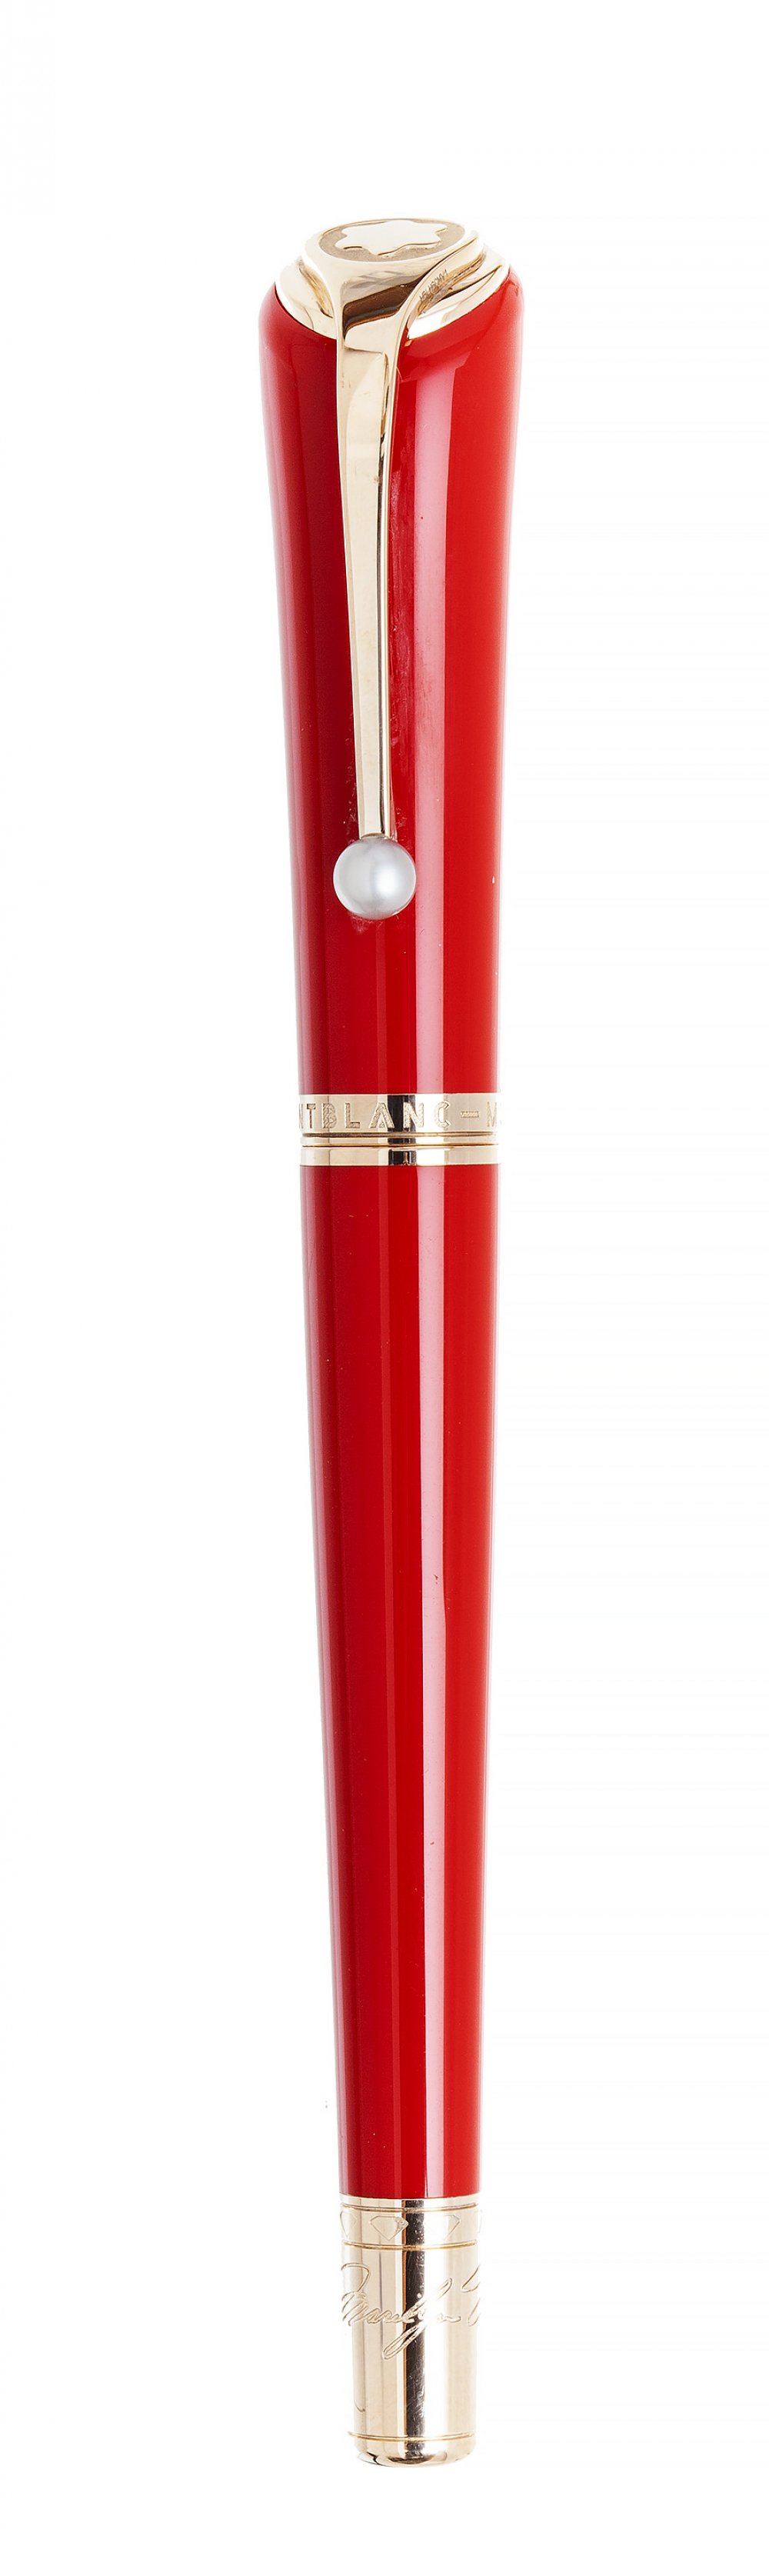 MONTBLANC FOUNTAIN PEN "MUSES: MARILYN MONROE".Barrel made of red resin and yellow gold.Limited